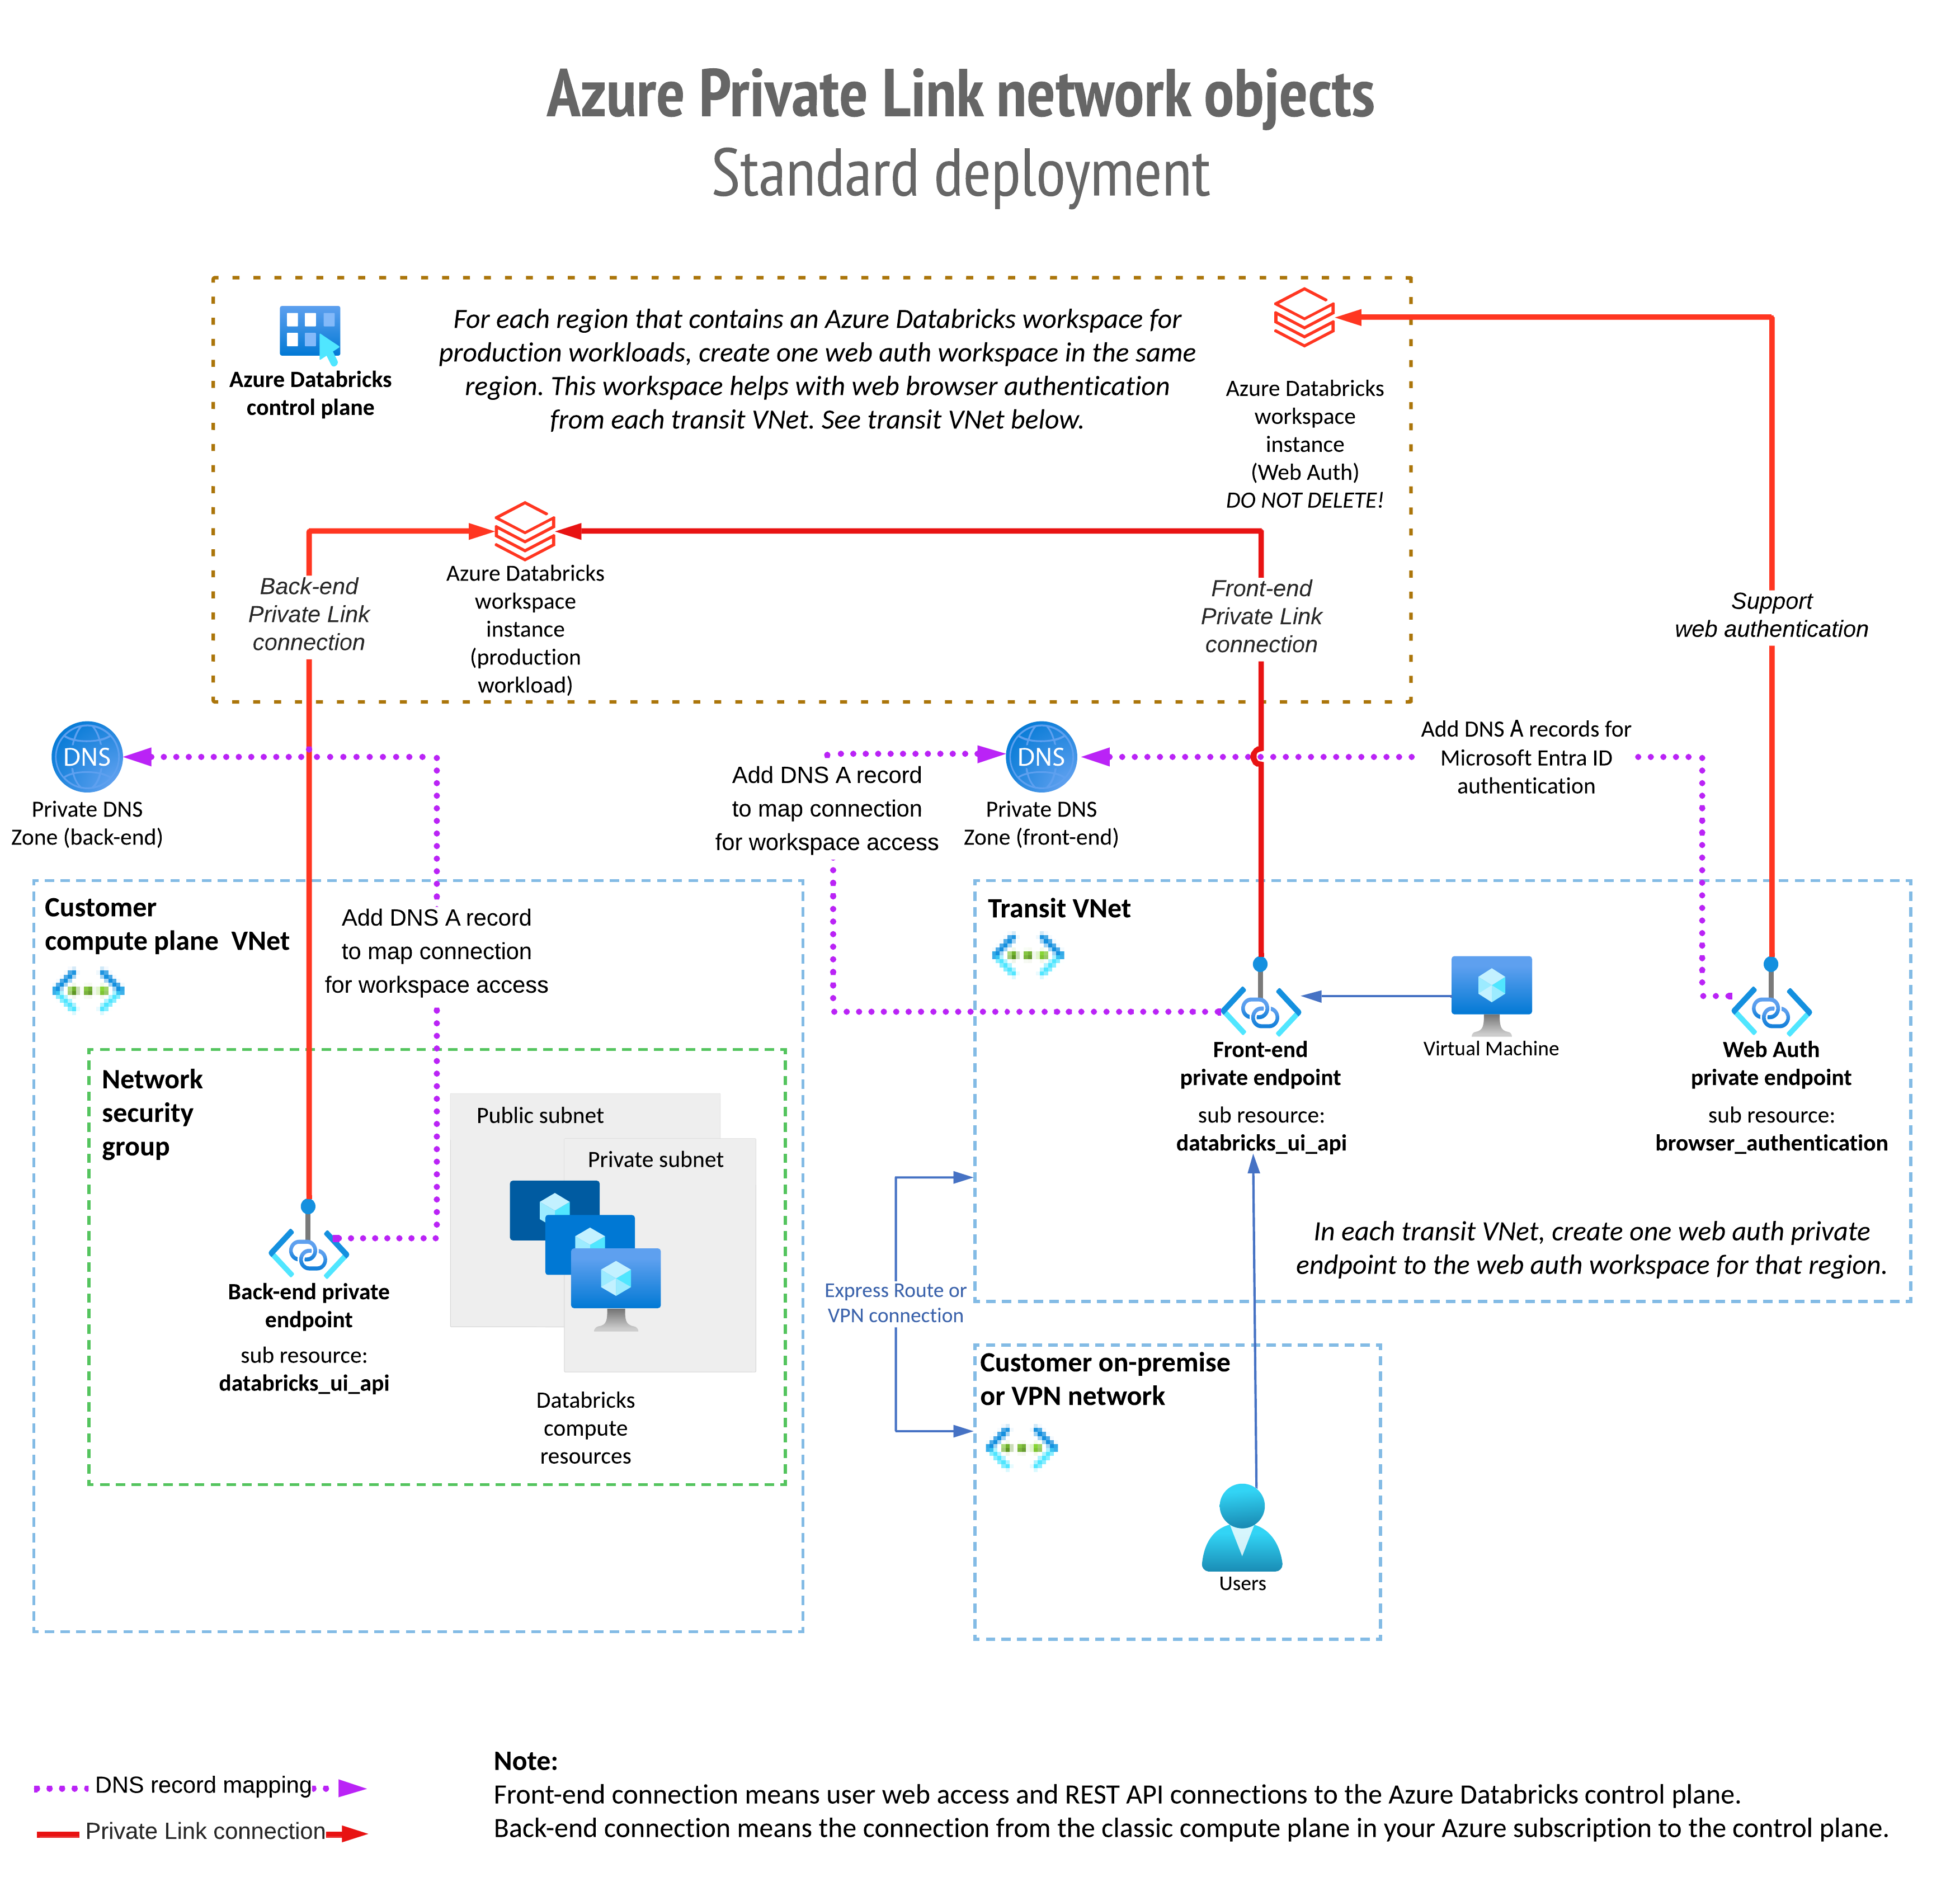 Azure Private Link network object architecture.